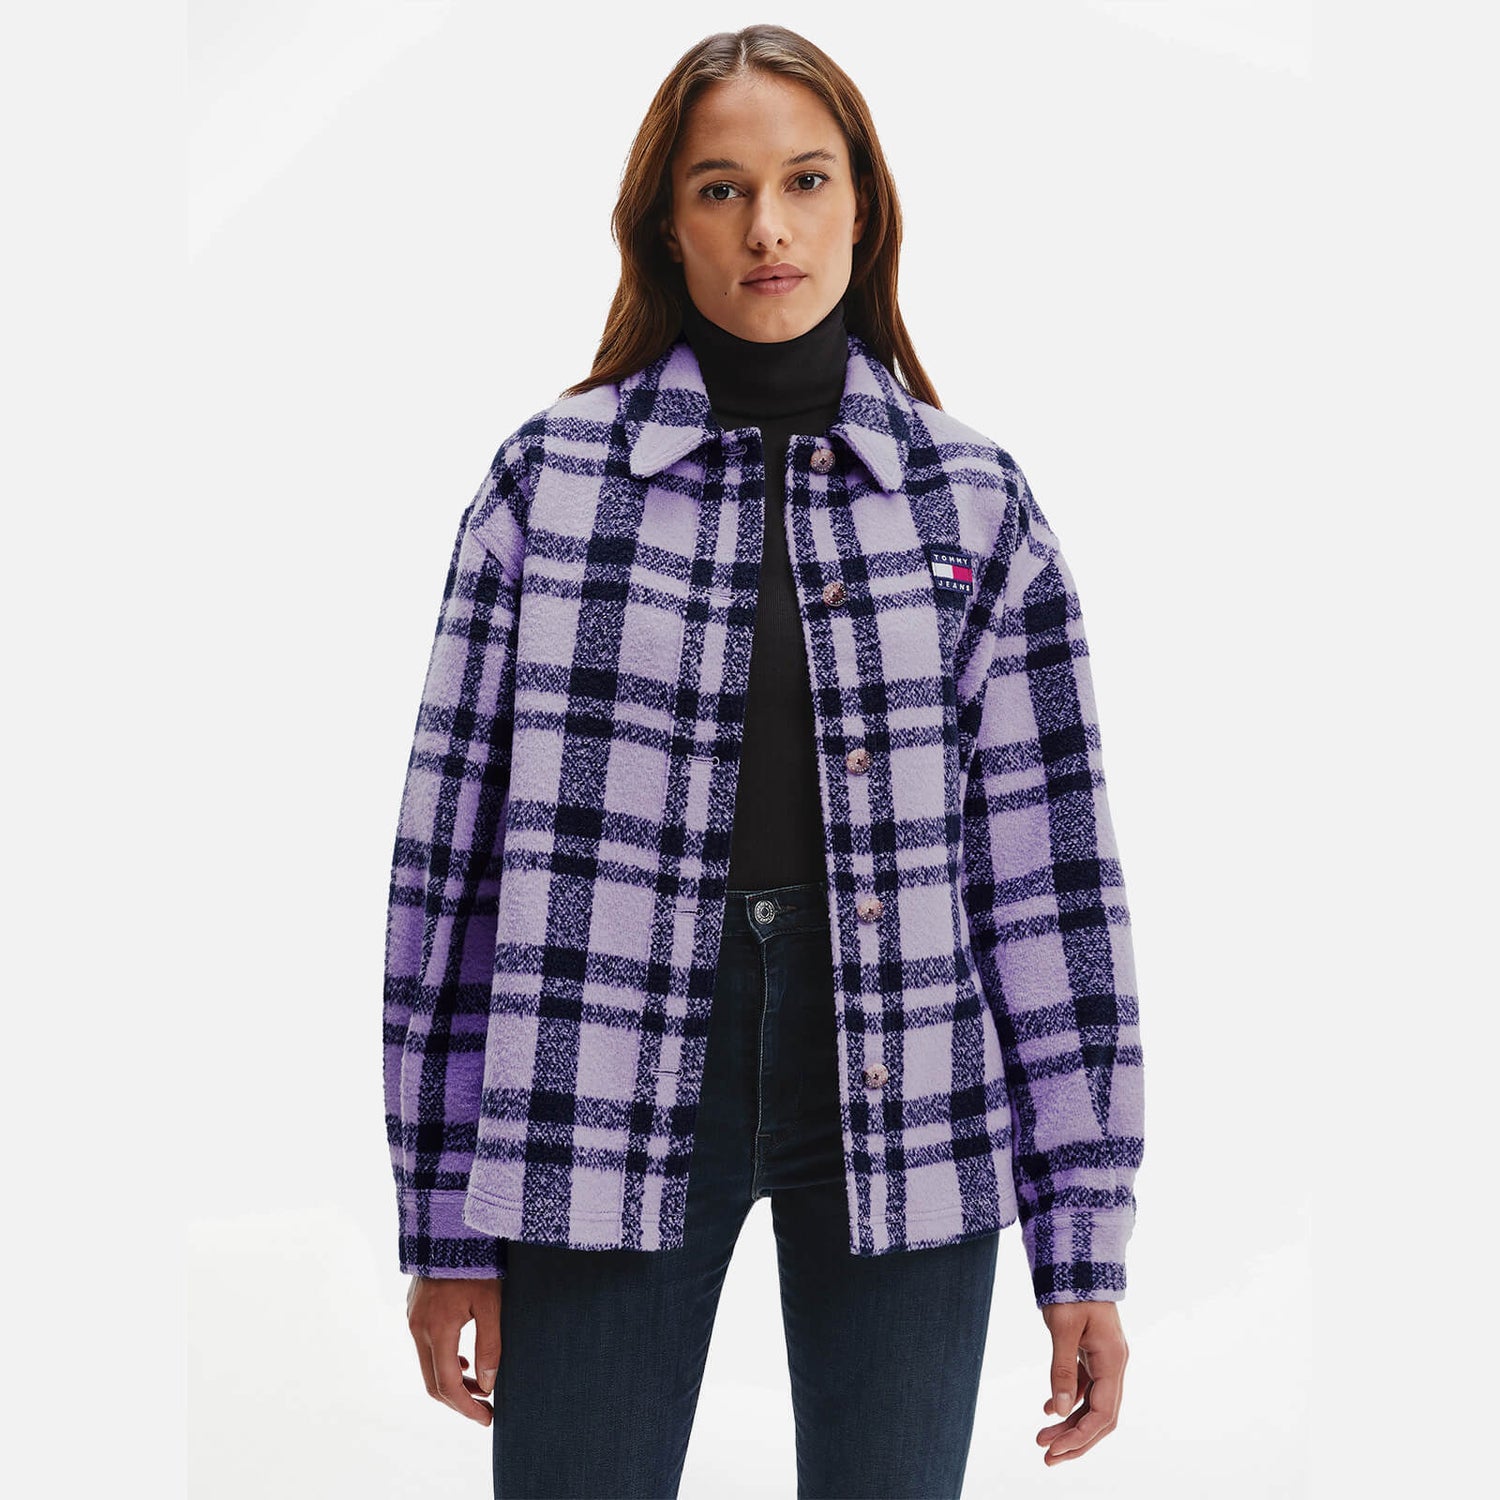 Tommy Jeans Women's Tjw Bright Check Overshirt - Violet Plaid